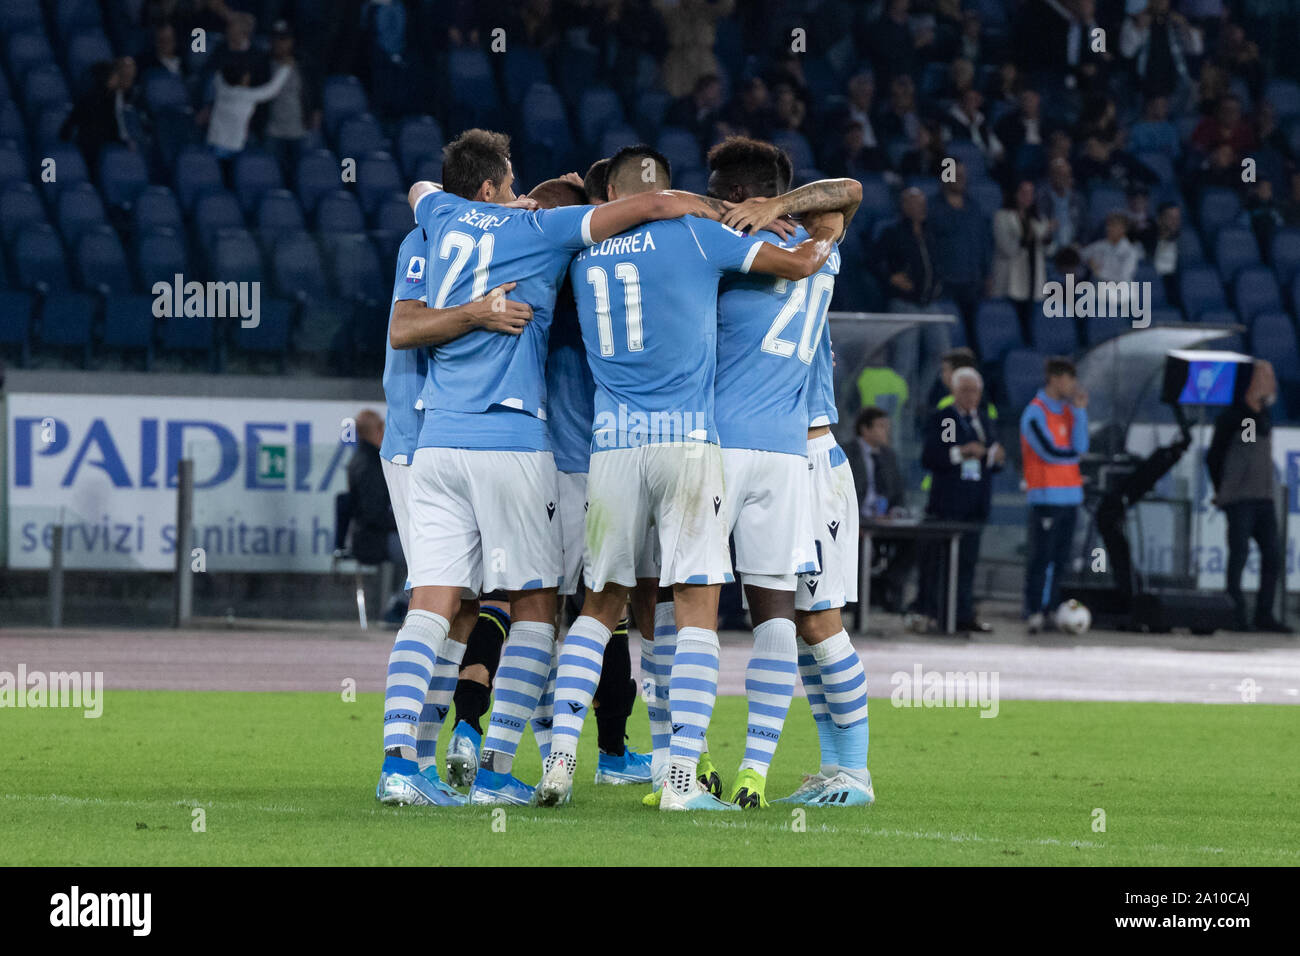 Rome, Italy. 22nd Sep, 2019. Adam Marusic of Lazio celebrates with his teammate after scoring a goal during the Serie A match between Lazio and Parma at Olimpico Stadium.(Final score: Lazio 2:0 Parma) Credit: SOPA Images Limited/Alamy Live News Stock Photo